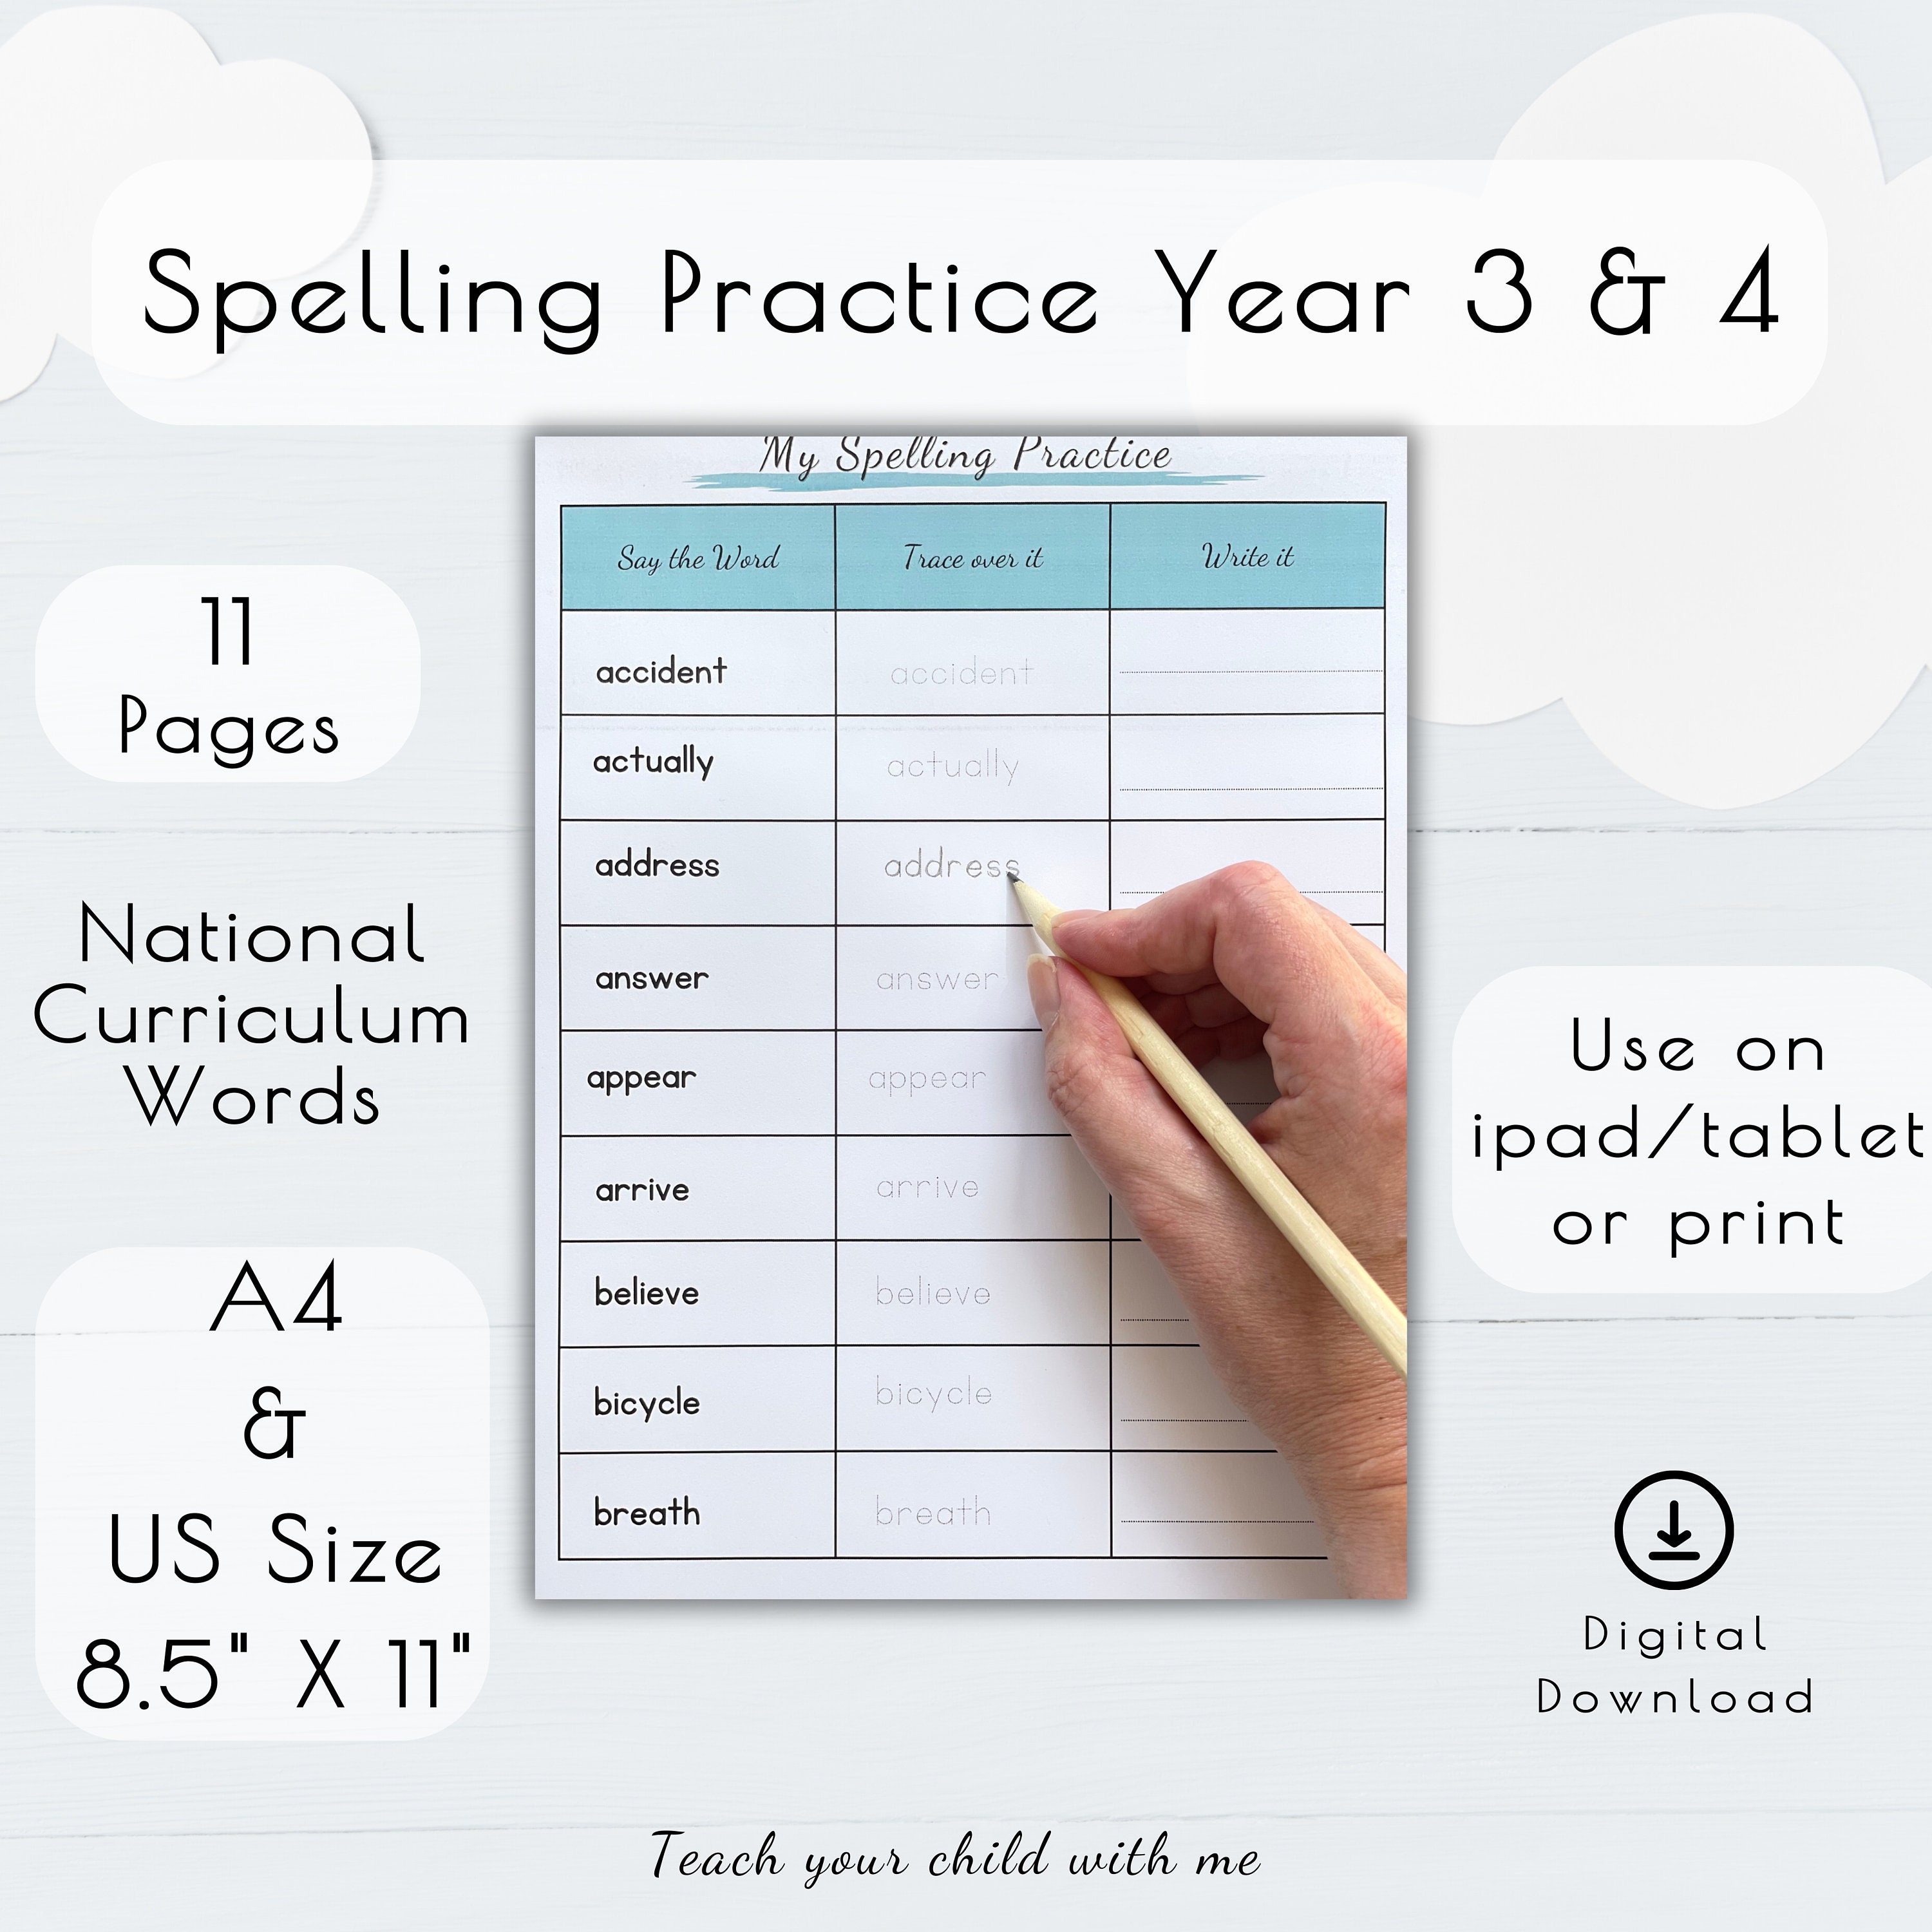 Spelling Practice for Pupils in Year 3 and 4 Use on Ipad/tablet picture